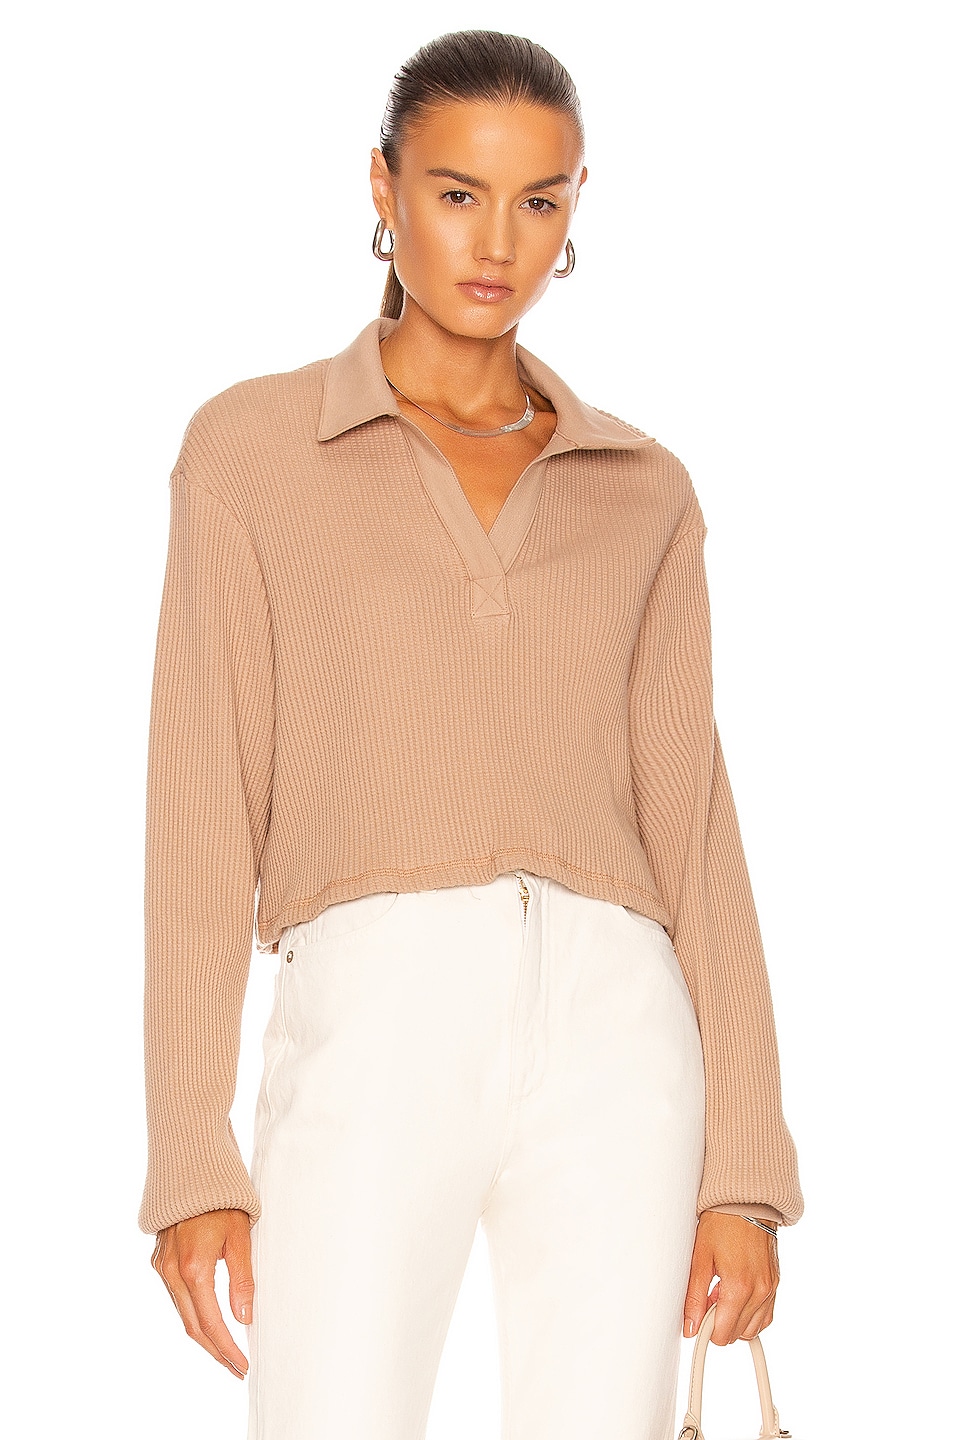 Image 1 of The Range Jumbo Thermal Cropped Long Sleeve Polo Top in Light Tawny